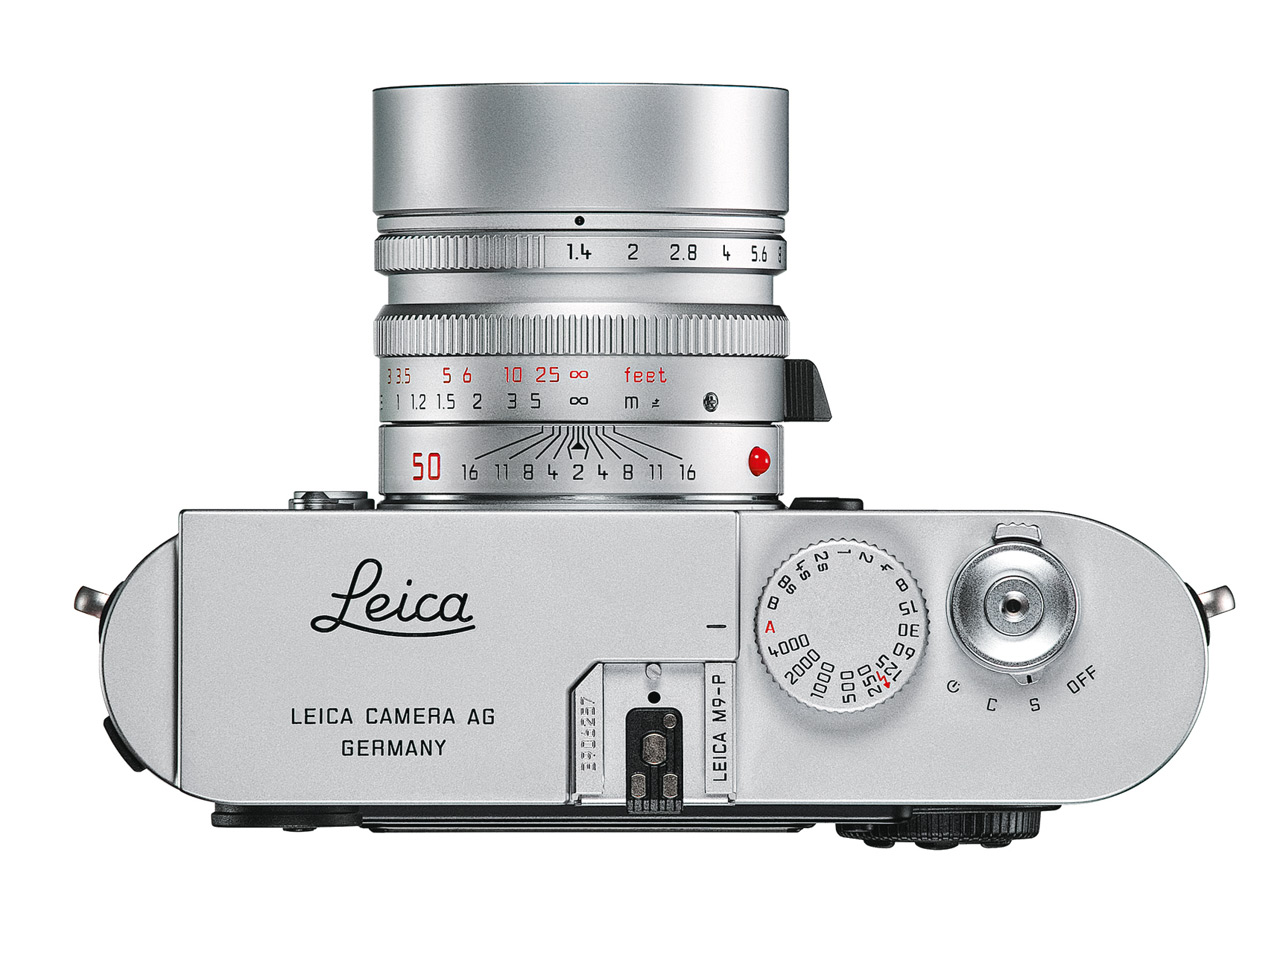 leibal_m9-p-white-limited-edition_leica_2